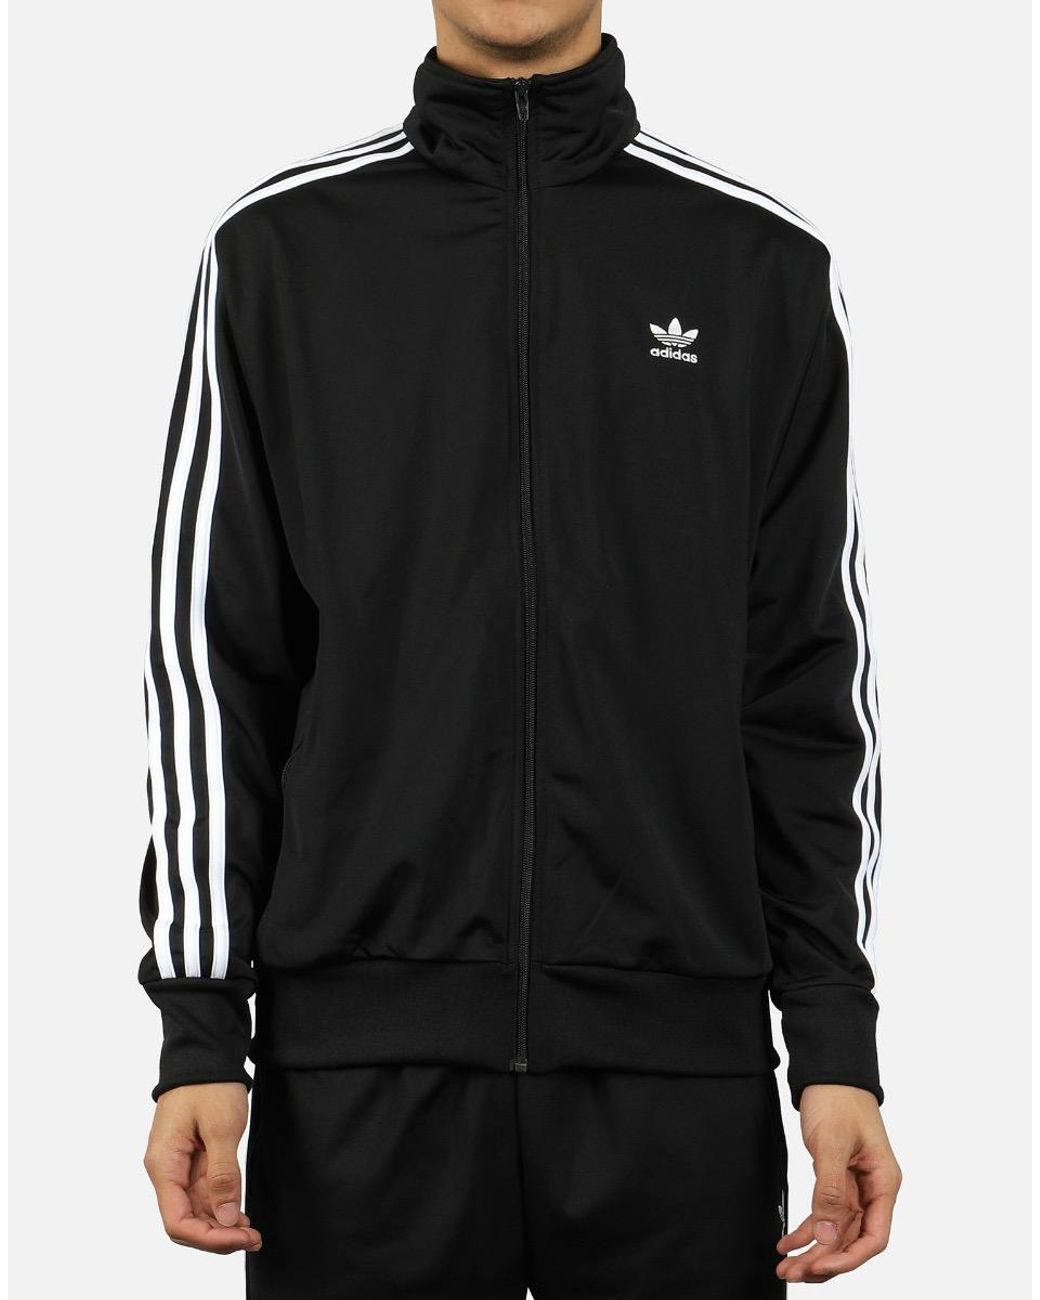 adidas Synthetic Firebird Track Jacket in Black for Men - Lyst